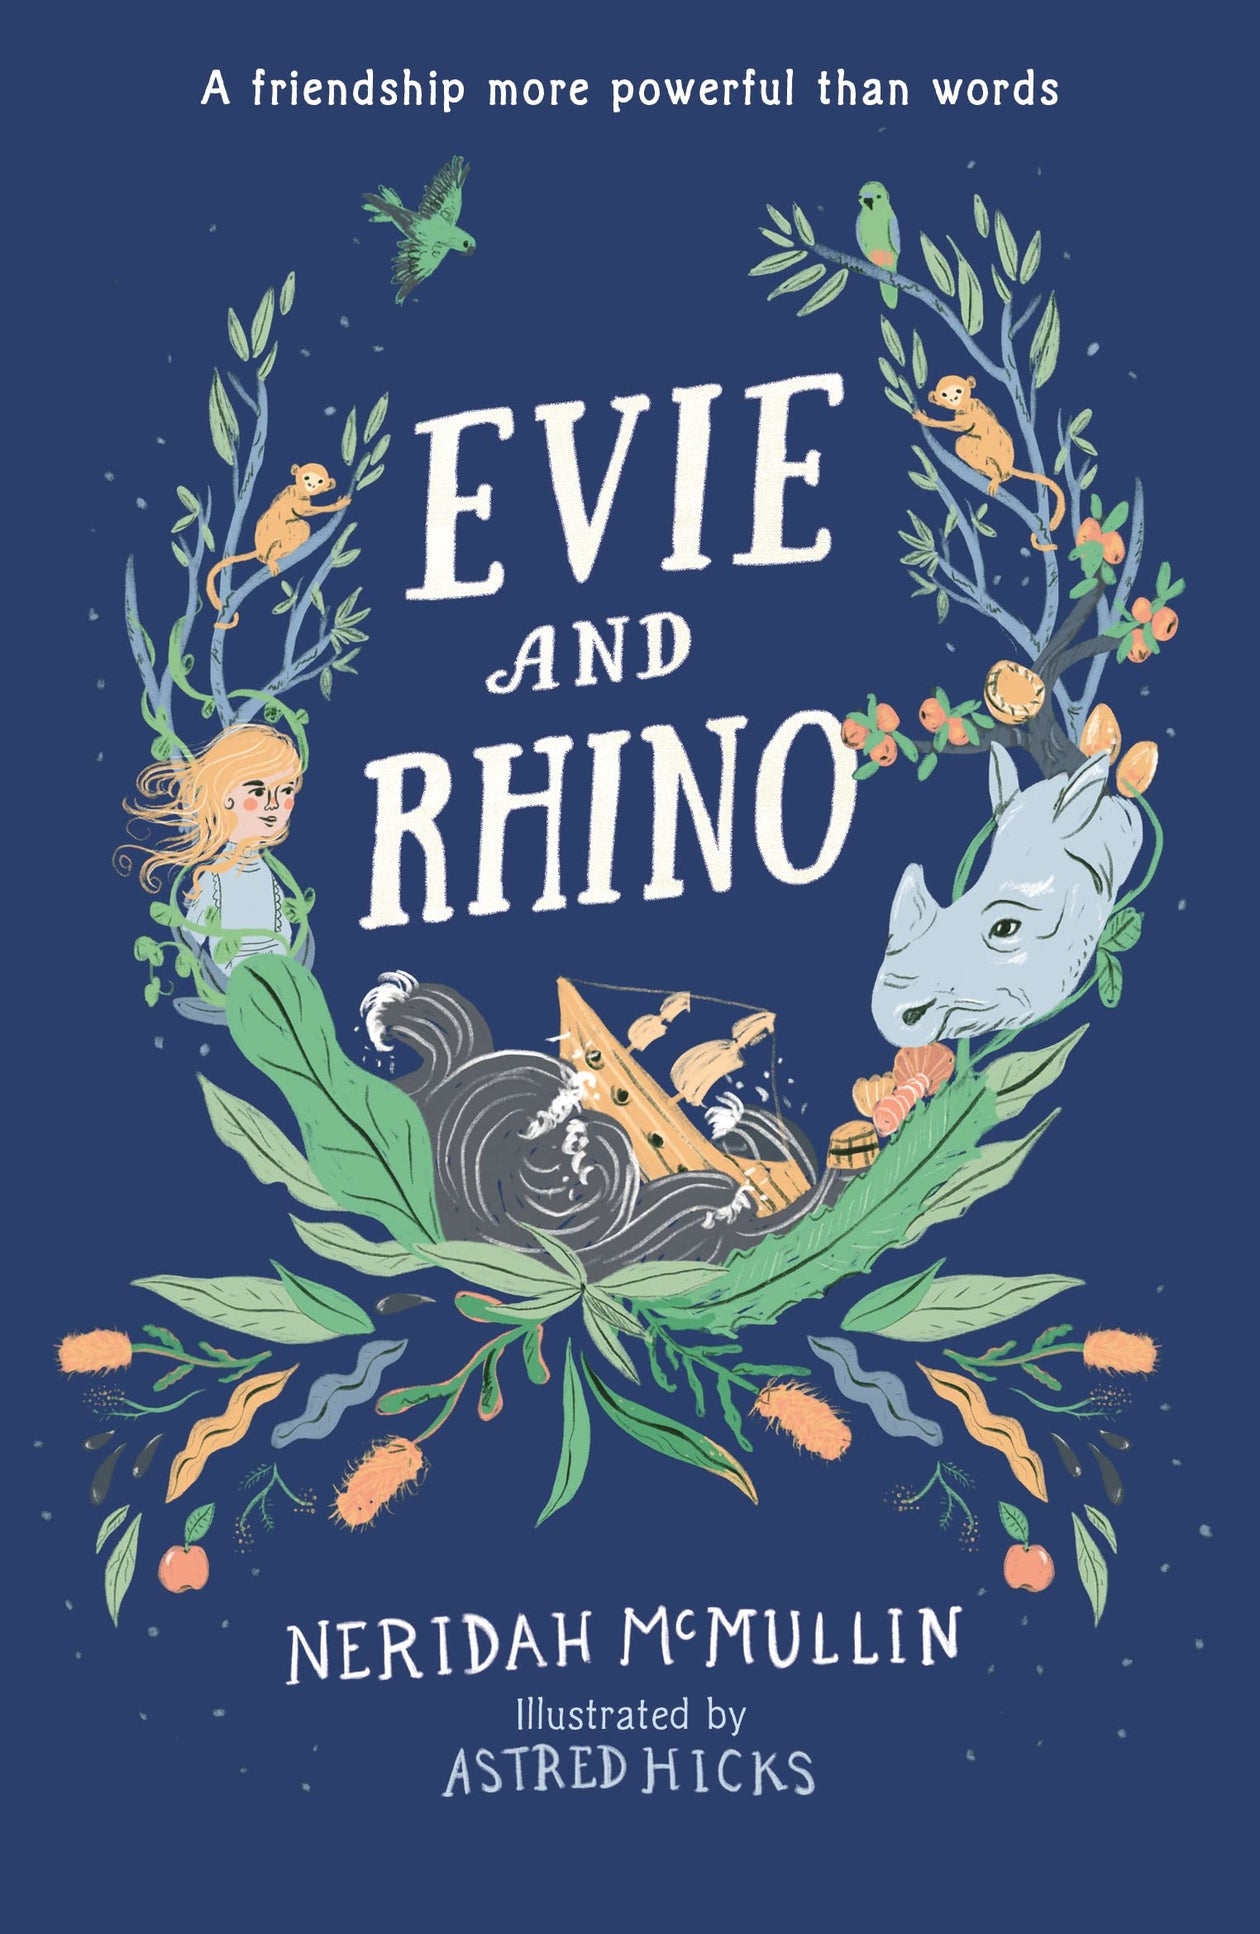 Neridah McMullin: Evie and Rhino, illustrated by Astred Hicks